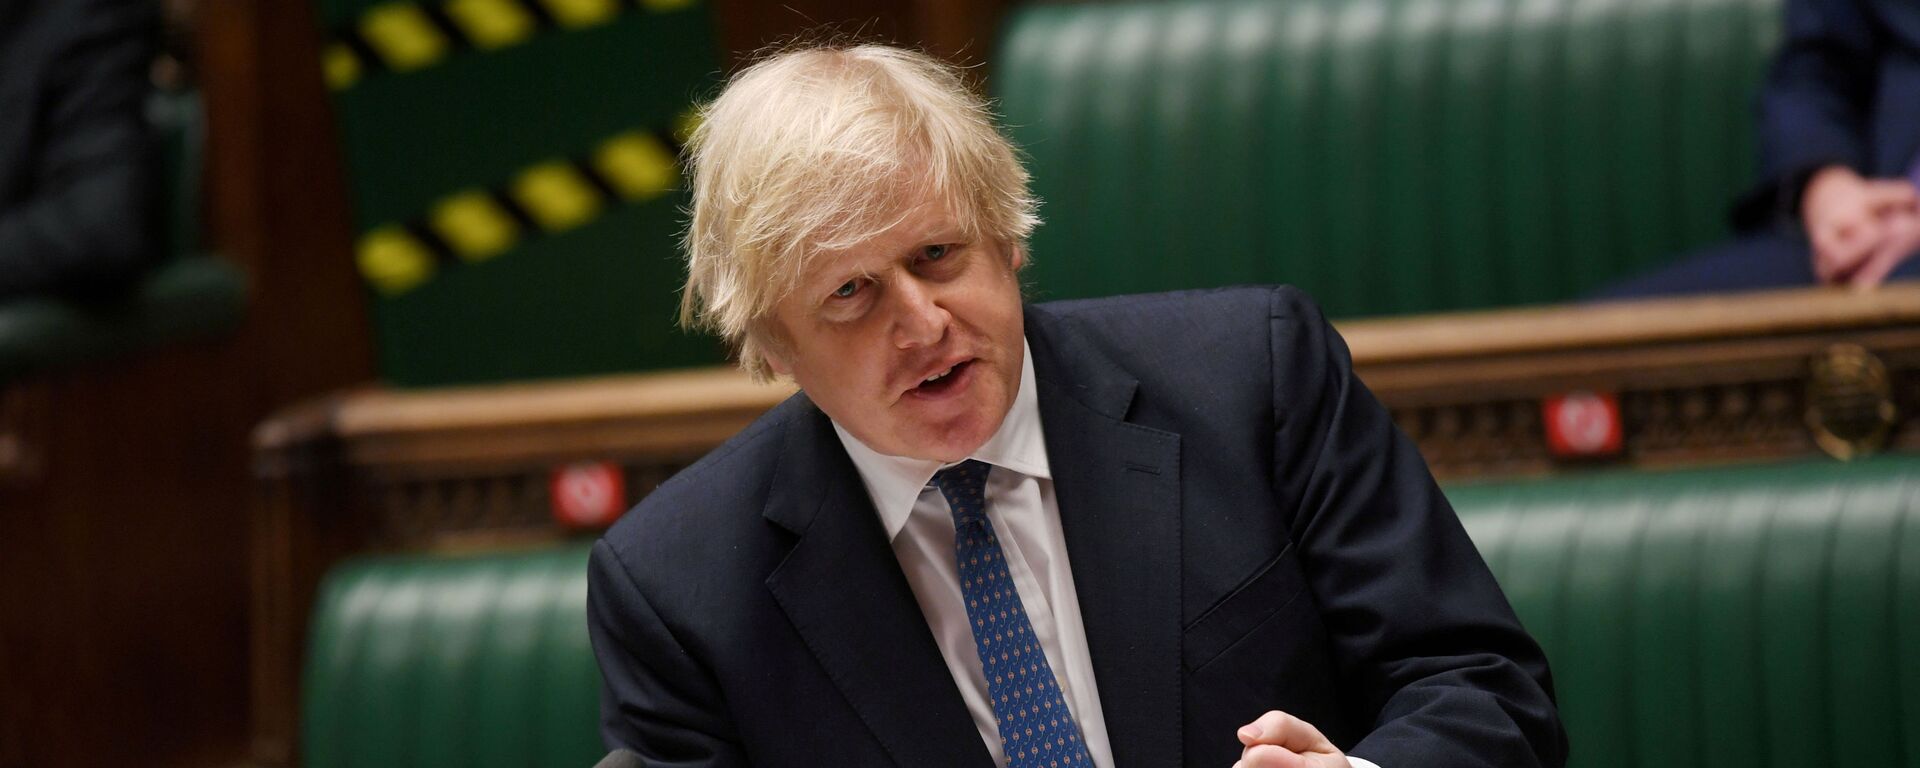 British Prime Minister Boris Johnson speaks during the weekly question time debate at the House of Commons in London, Britain, March 10, 2021 - Sputnik International, 1920